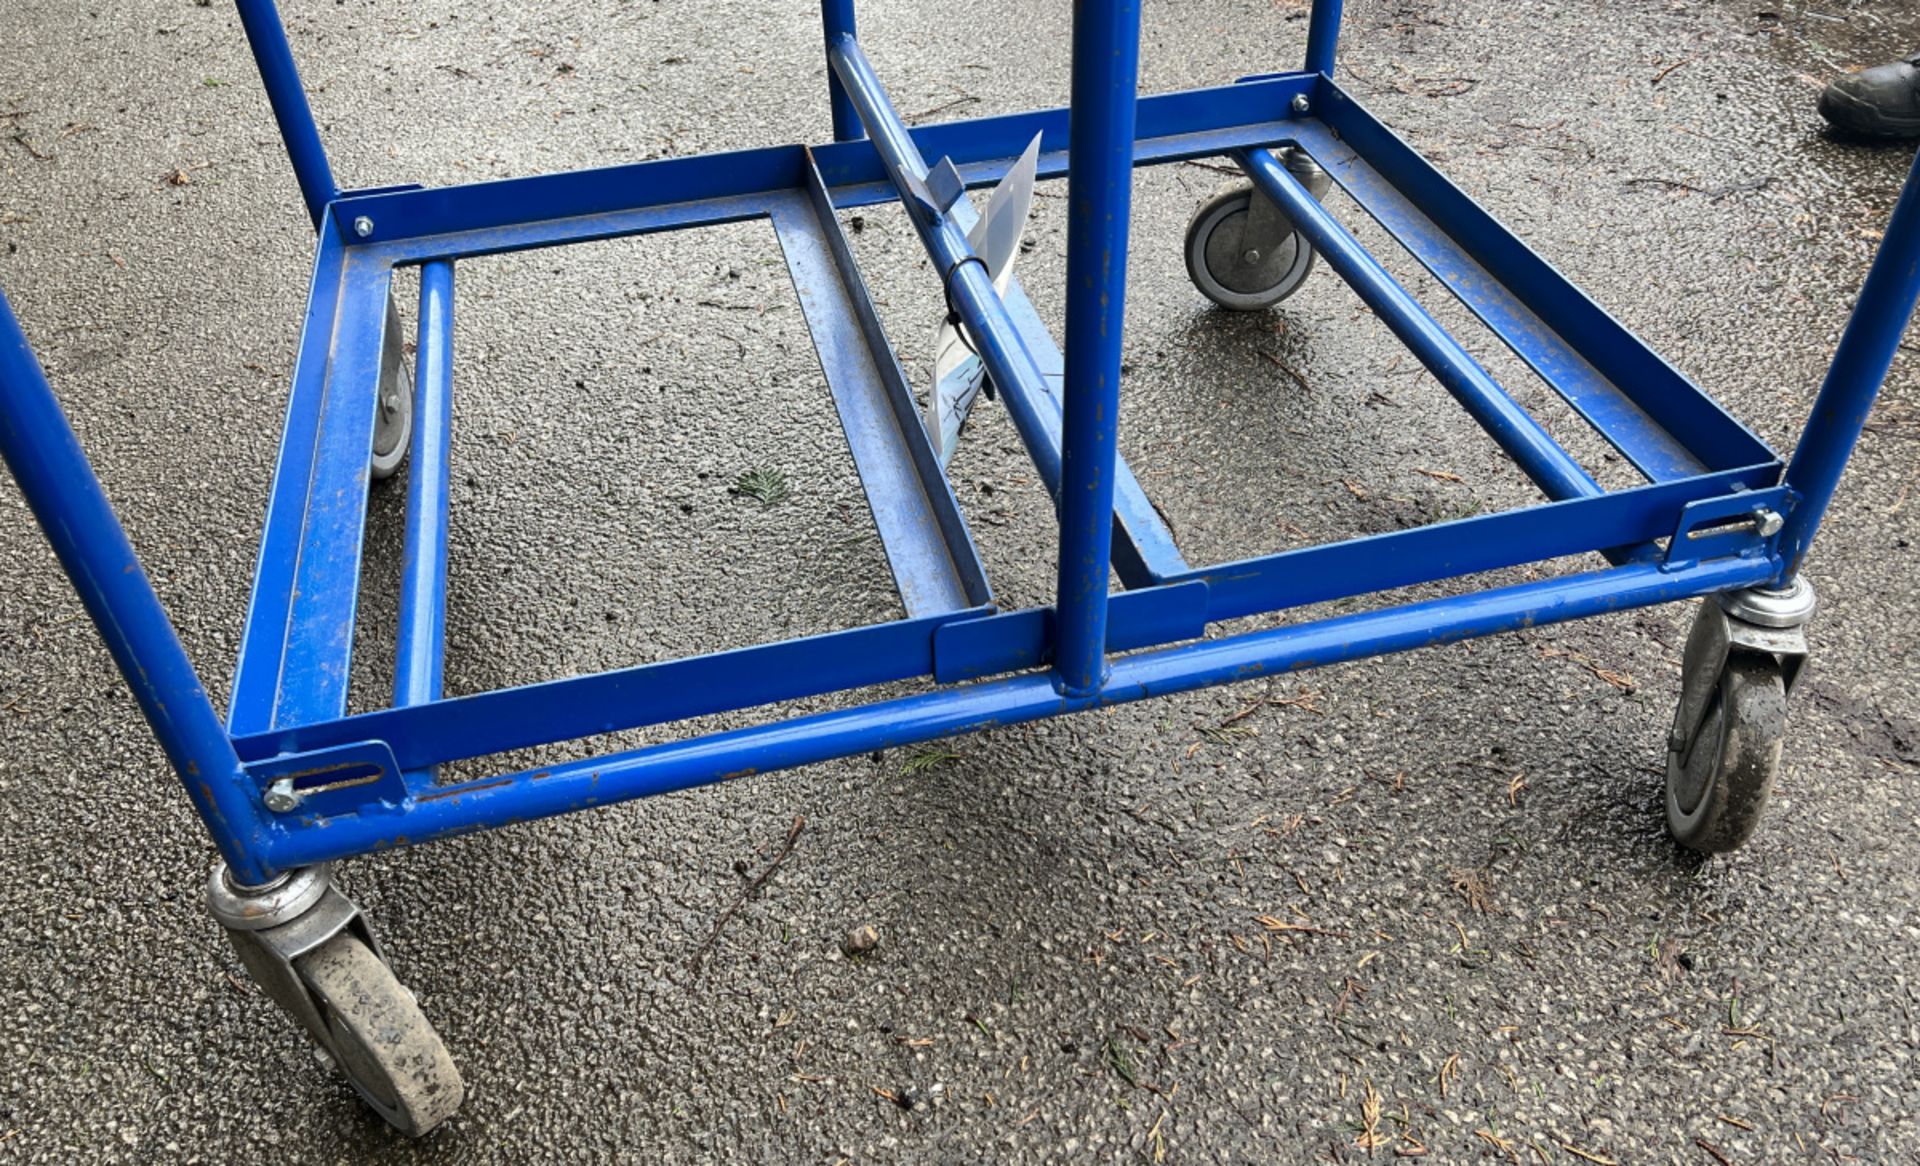 Blue wheeled trolley with shelves for tote boxes - L 120 x W 70 x H 90 cm - Image 3 of 3